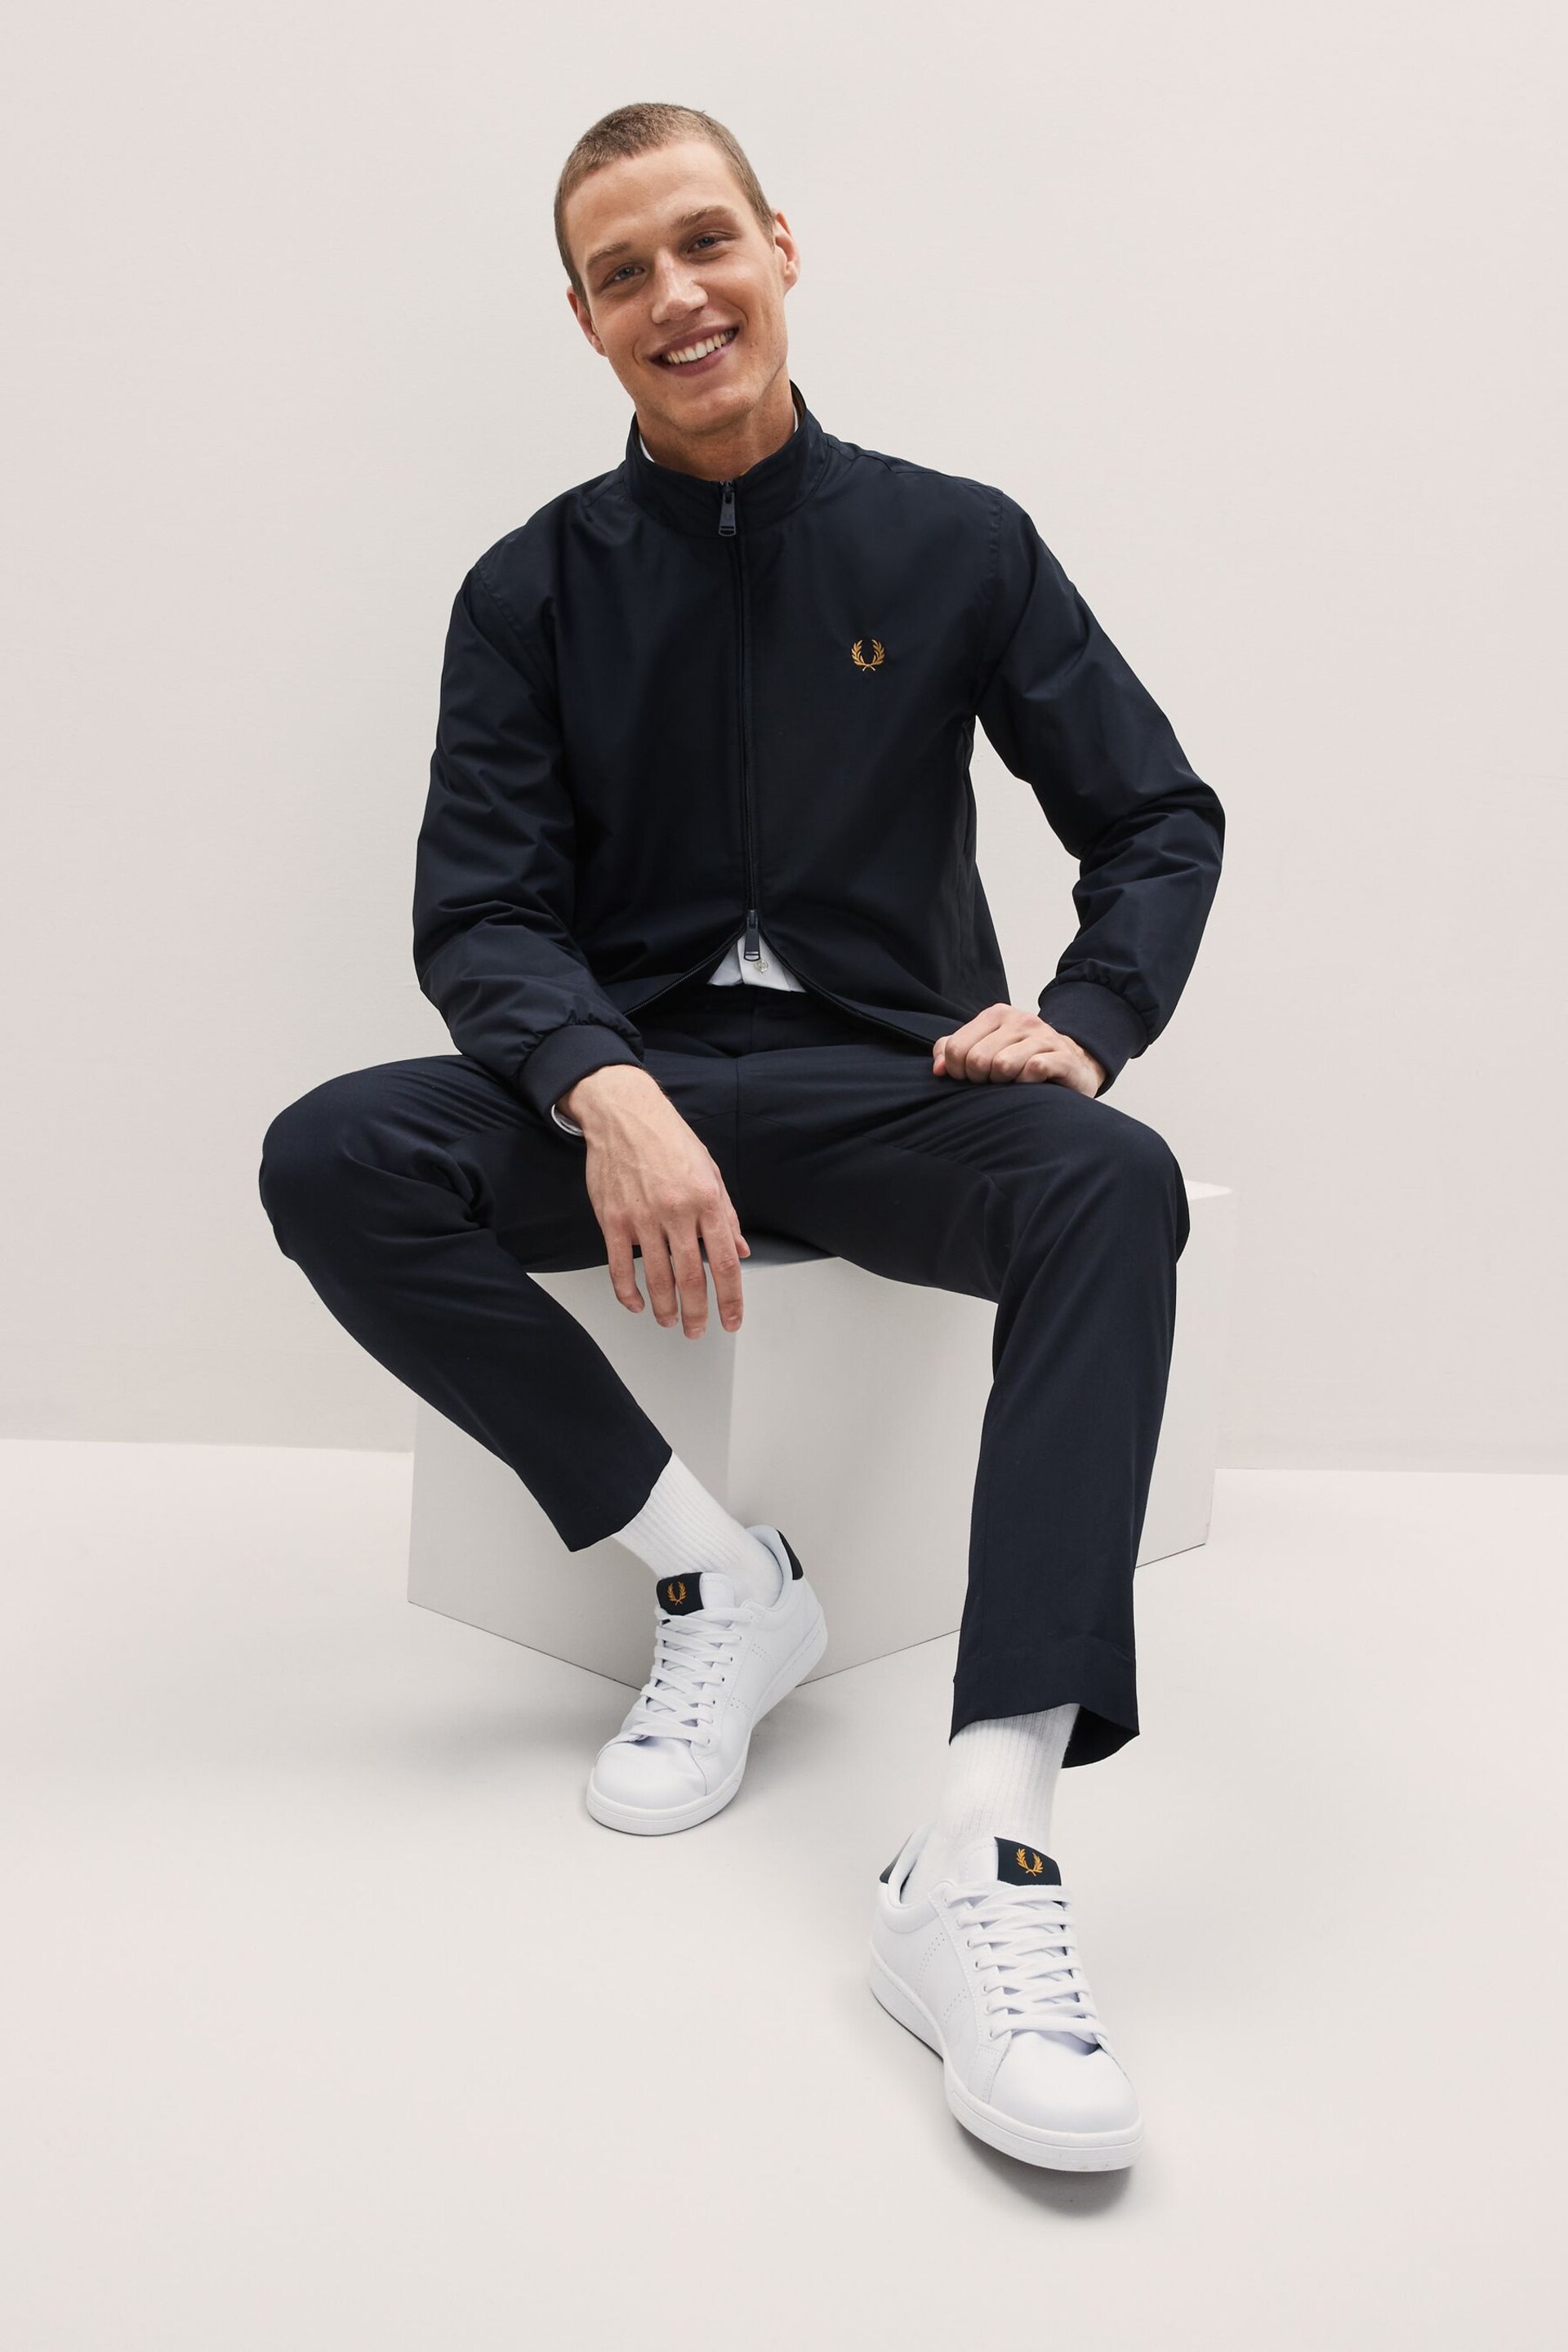 Fred Perry Brentham Sports Jacket - Image 4 of 9